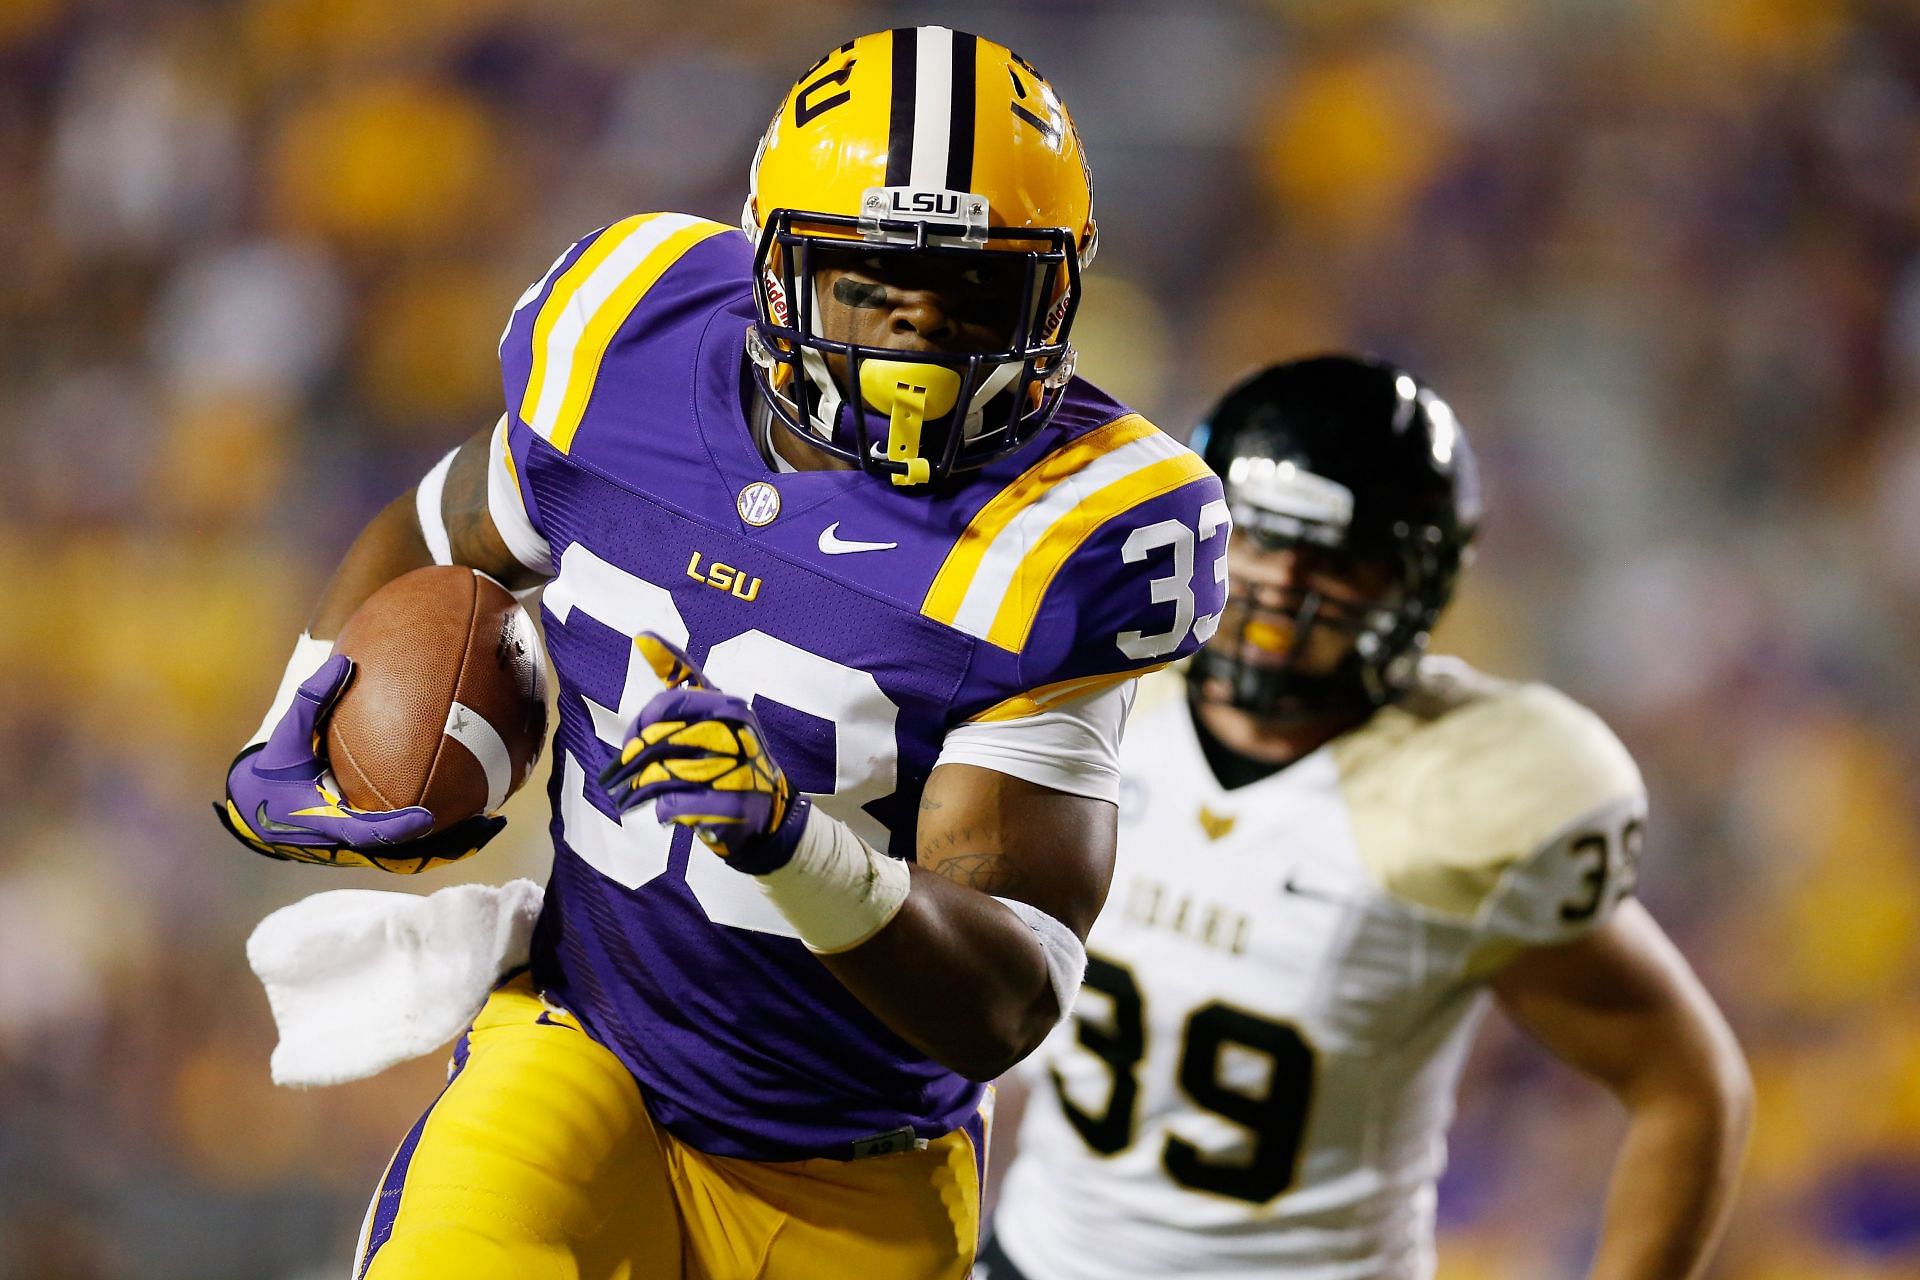 Jeremy Hill played just two seasons with LSU